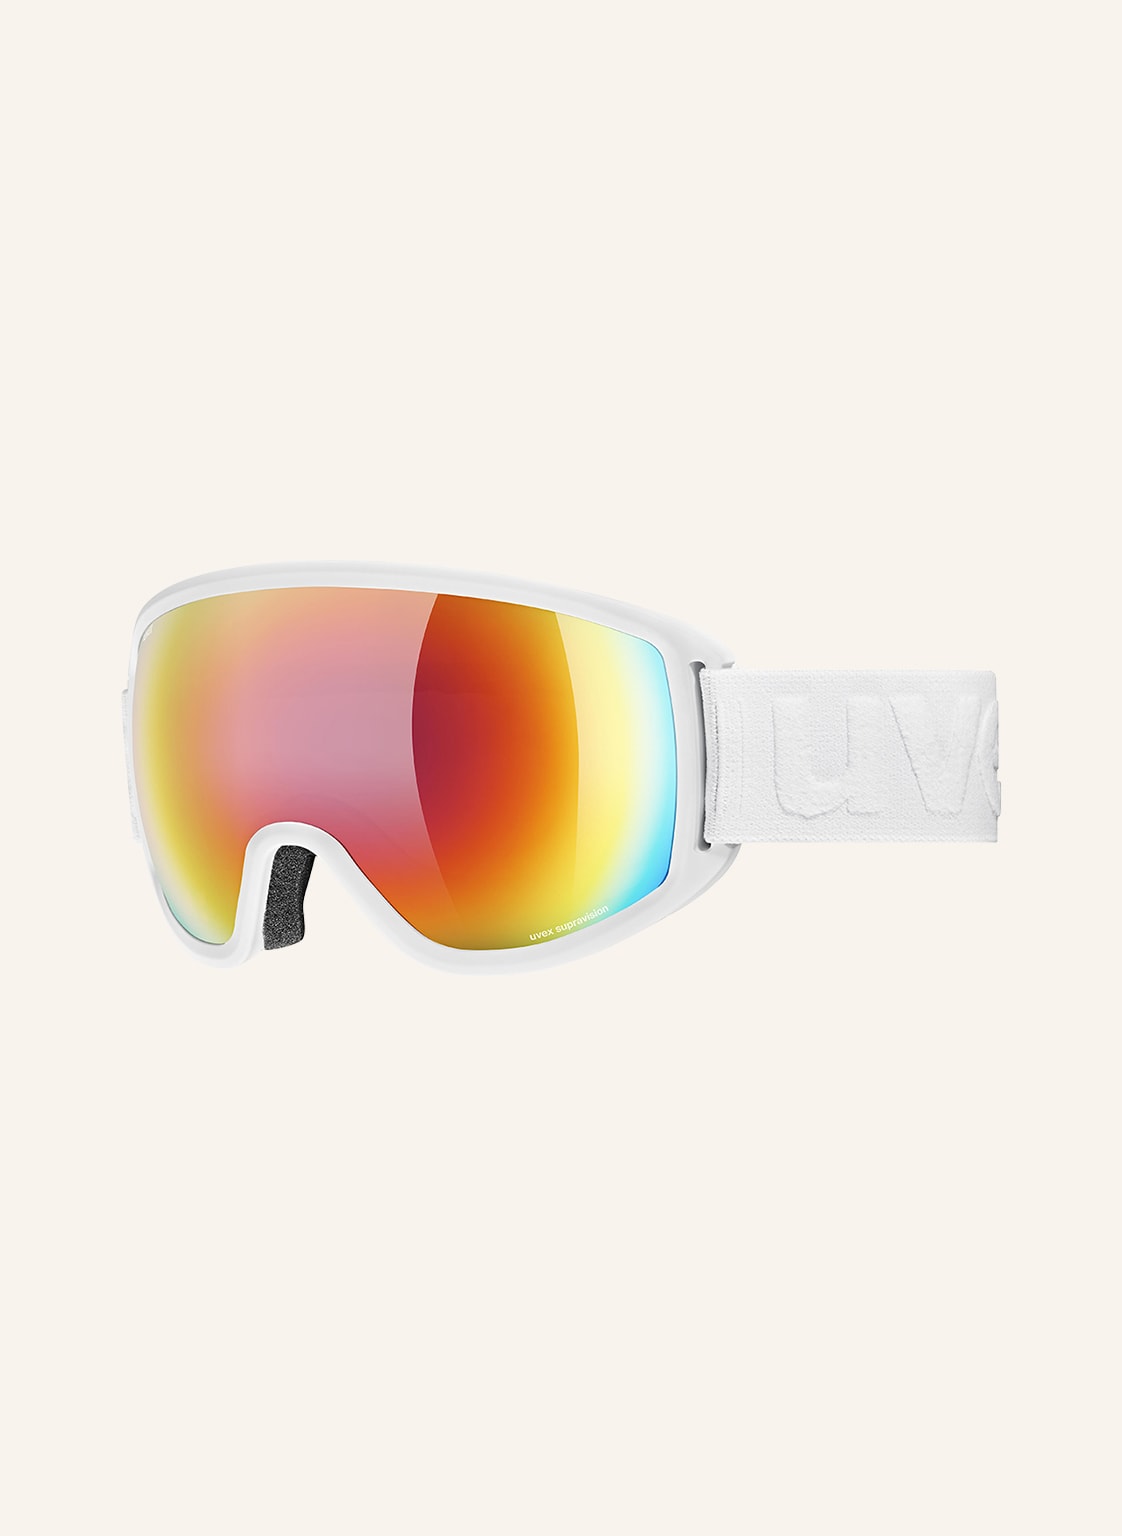 Image of Uvex Skibrille Topic Fm Sphere weiss